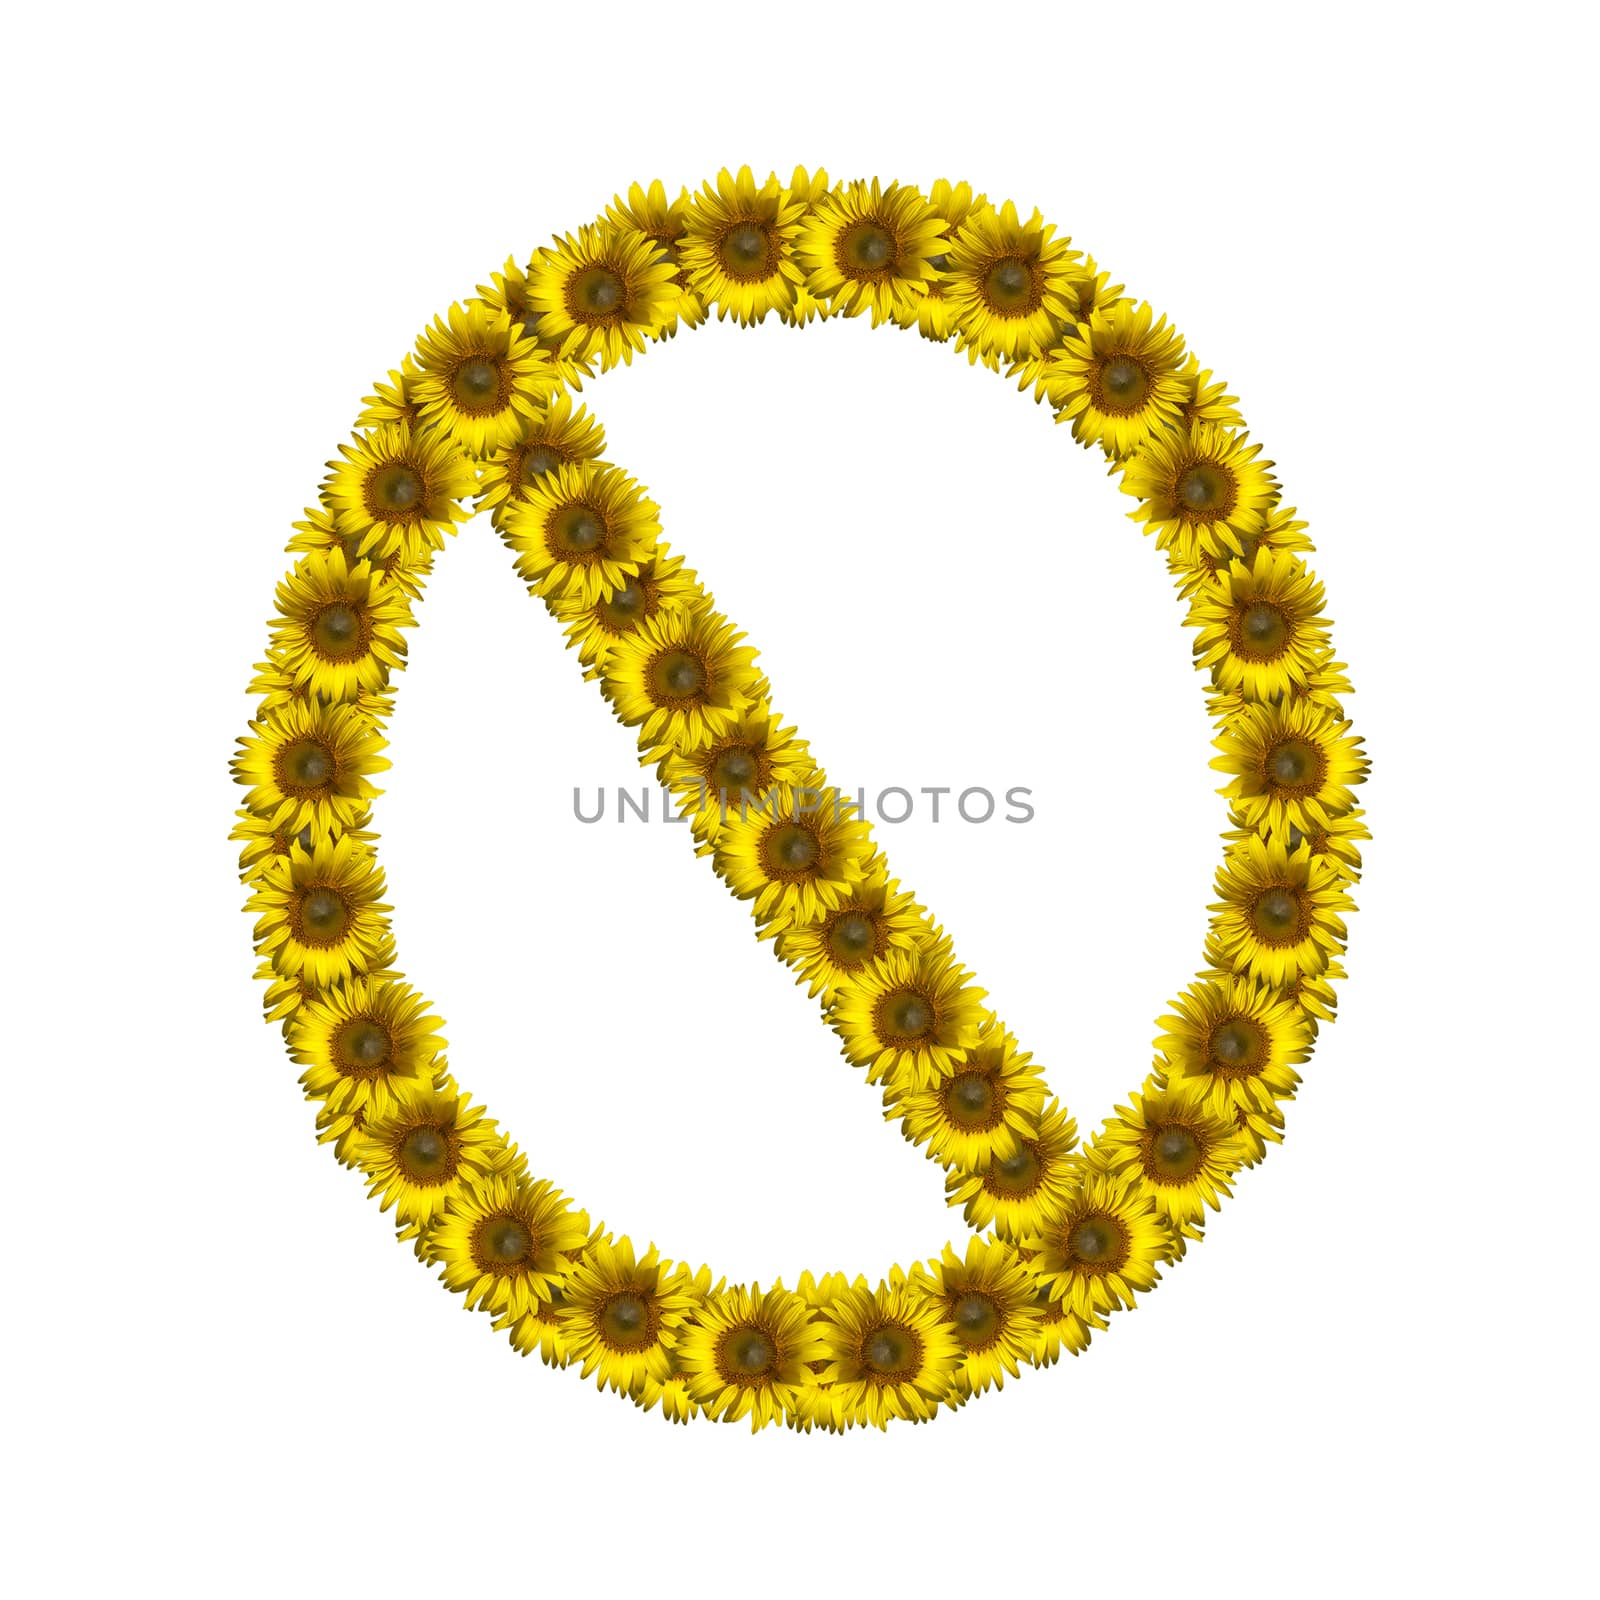 Sunflower number isolated on white background, number 0